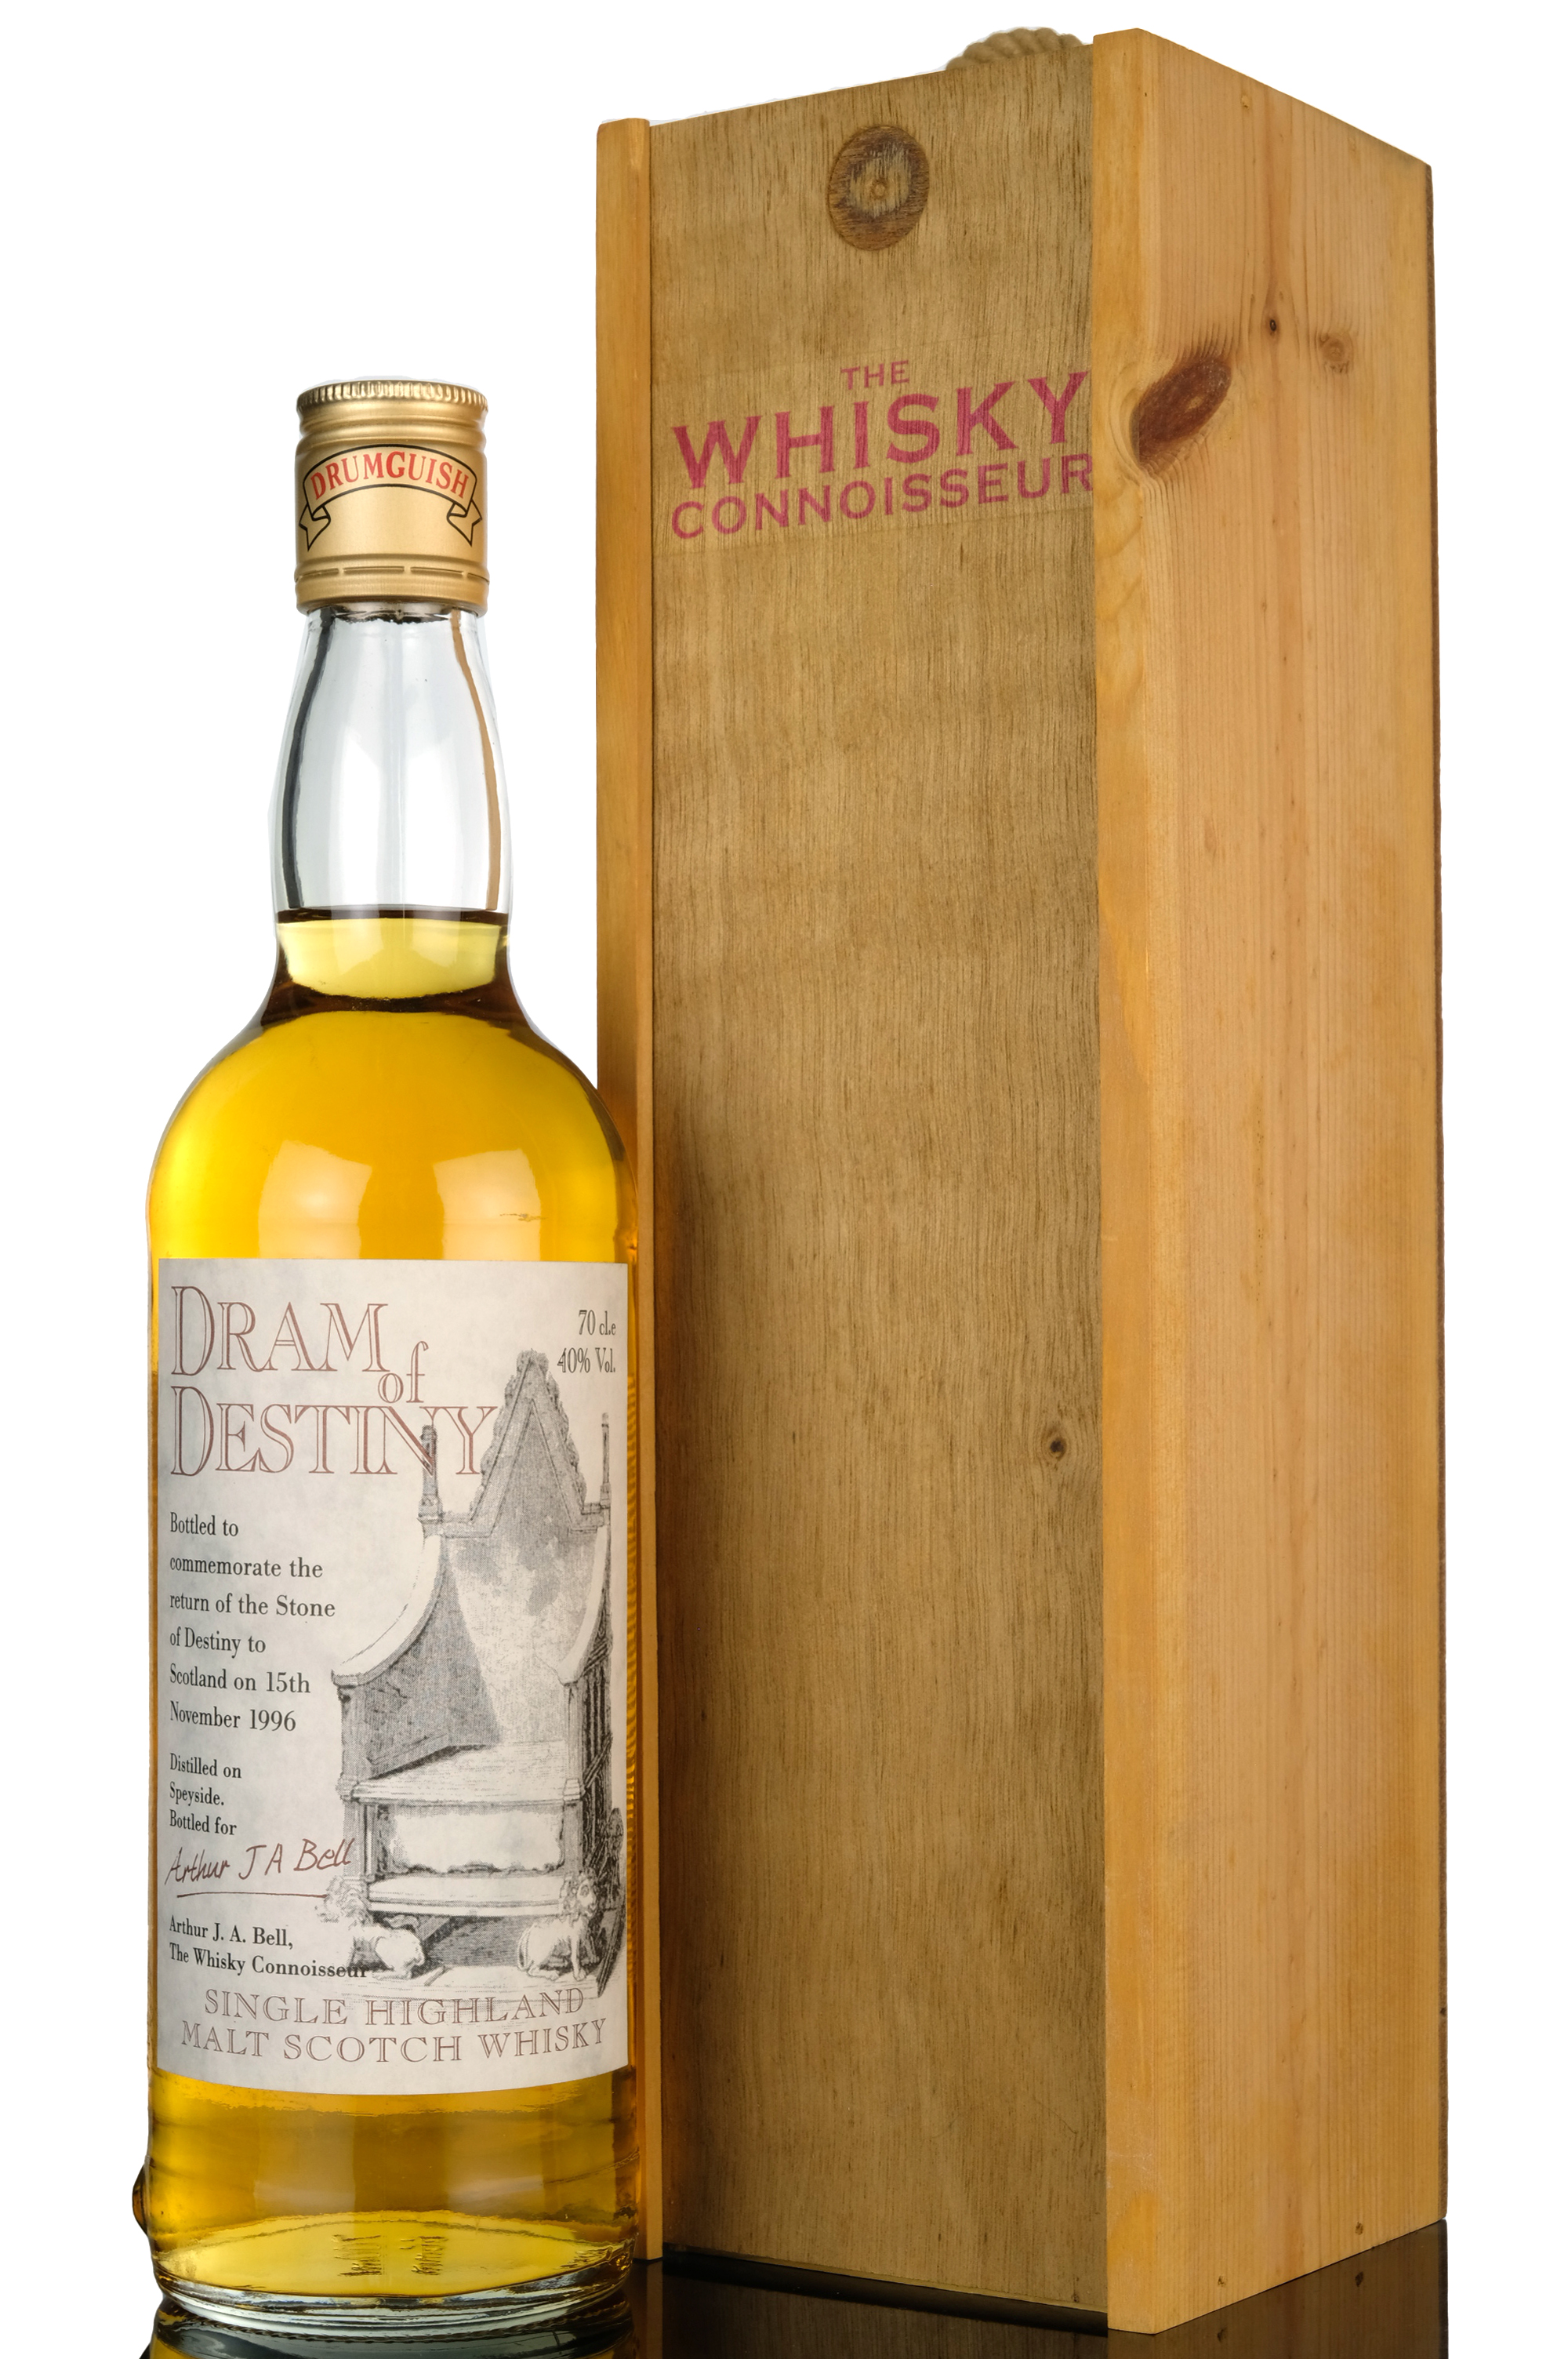 Dram Of Destiny - The Whisky Connoisseur - Limited Edition - 1996 Release